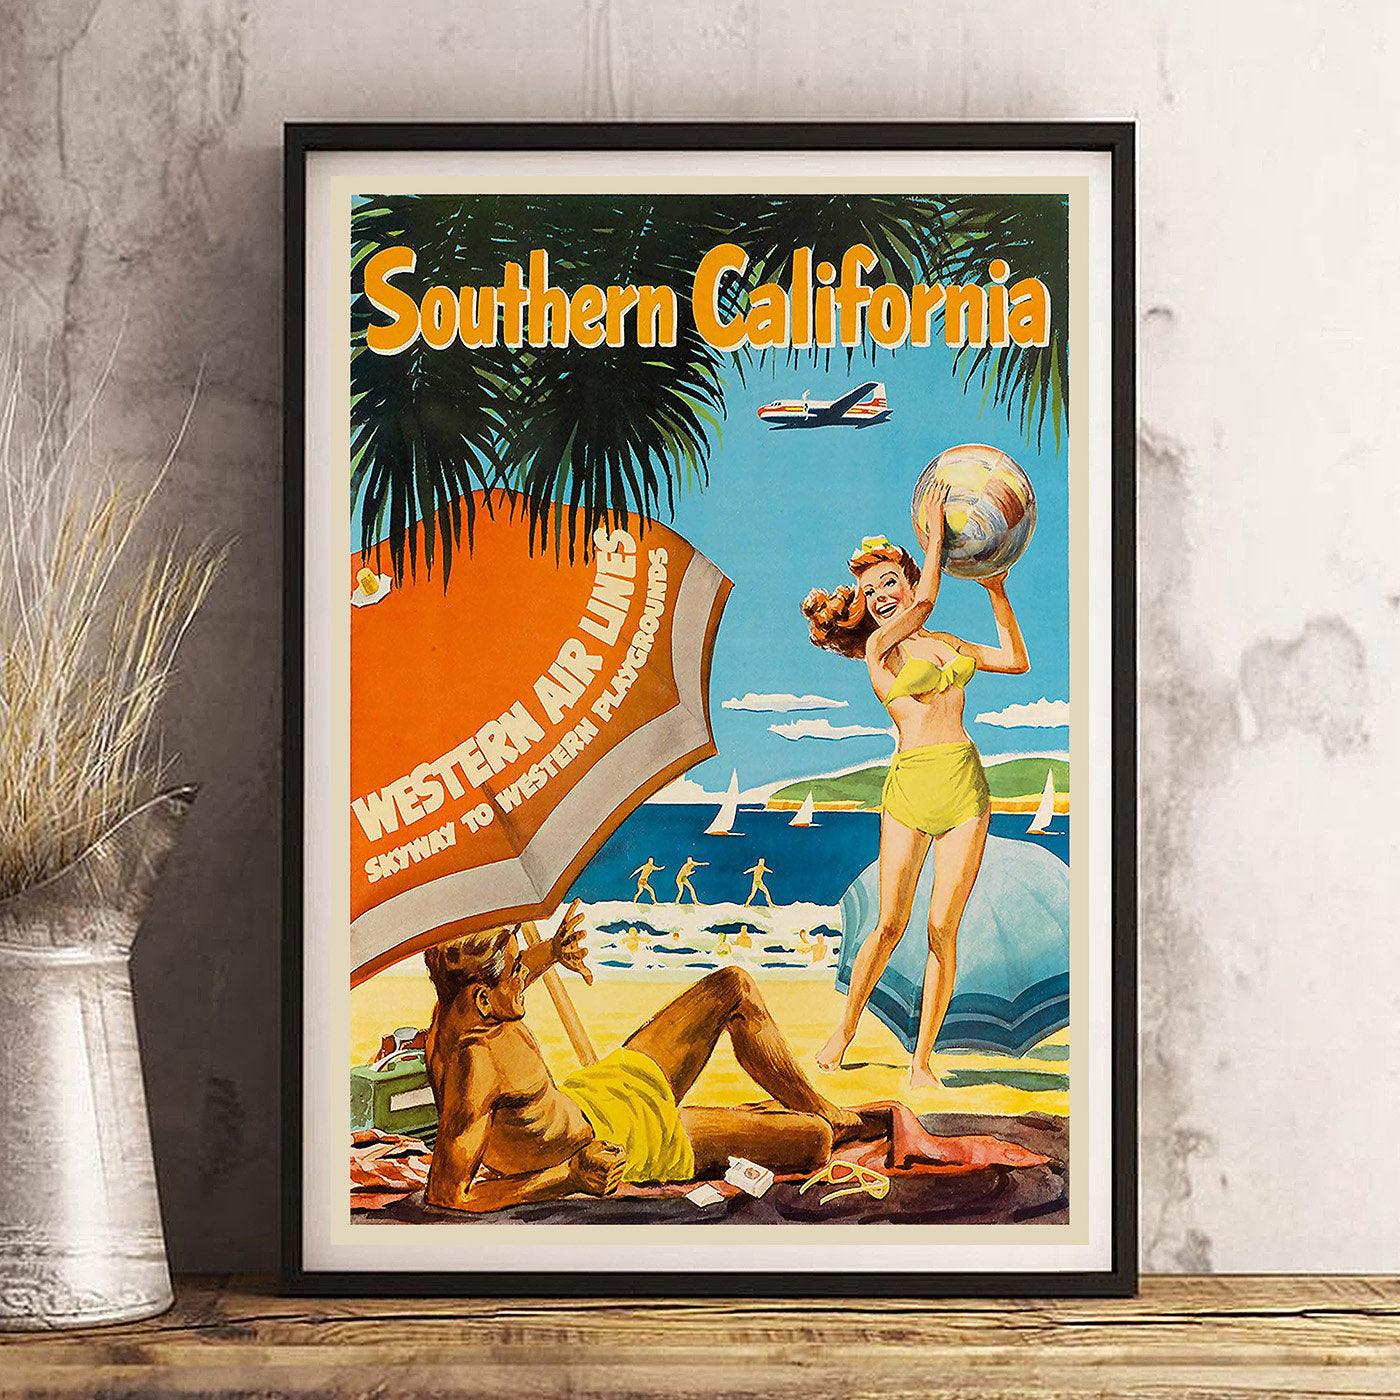 SOUTHERN CALIFORNIA - Vintage Travel Poster - Classic Posters